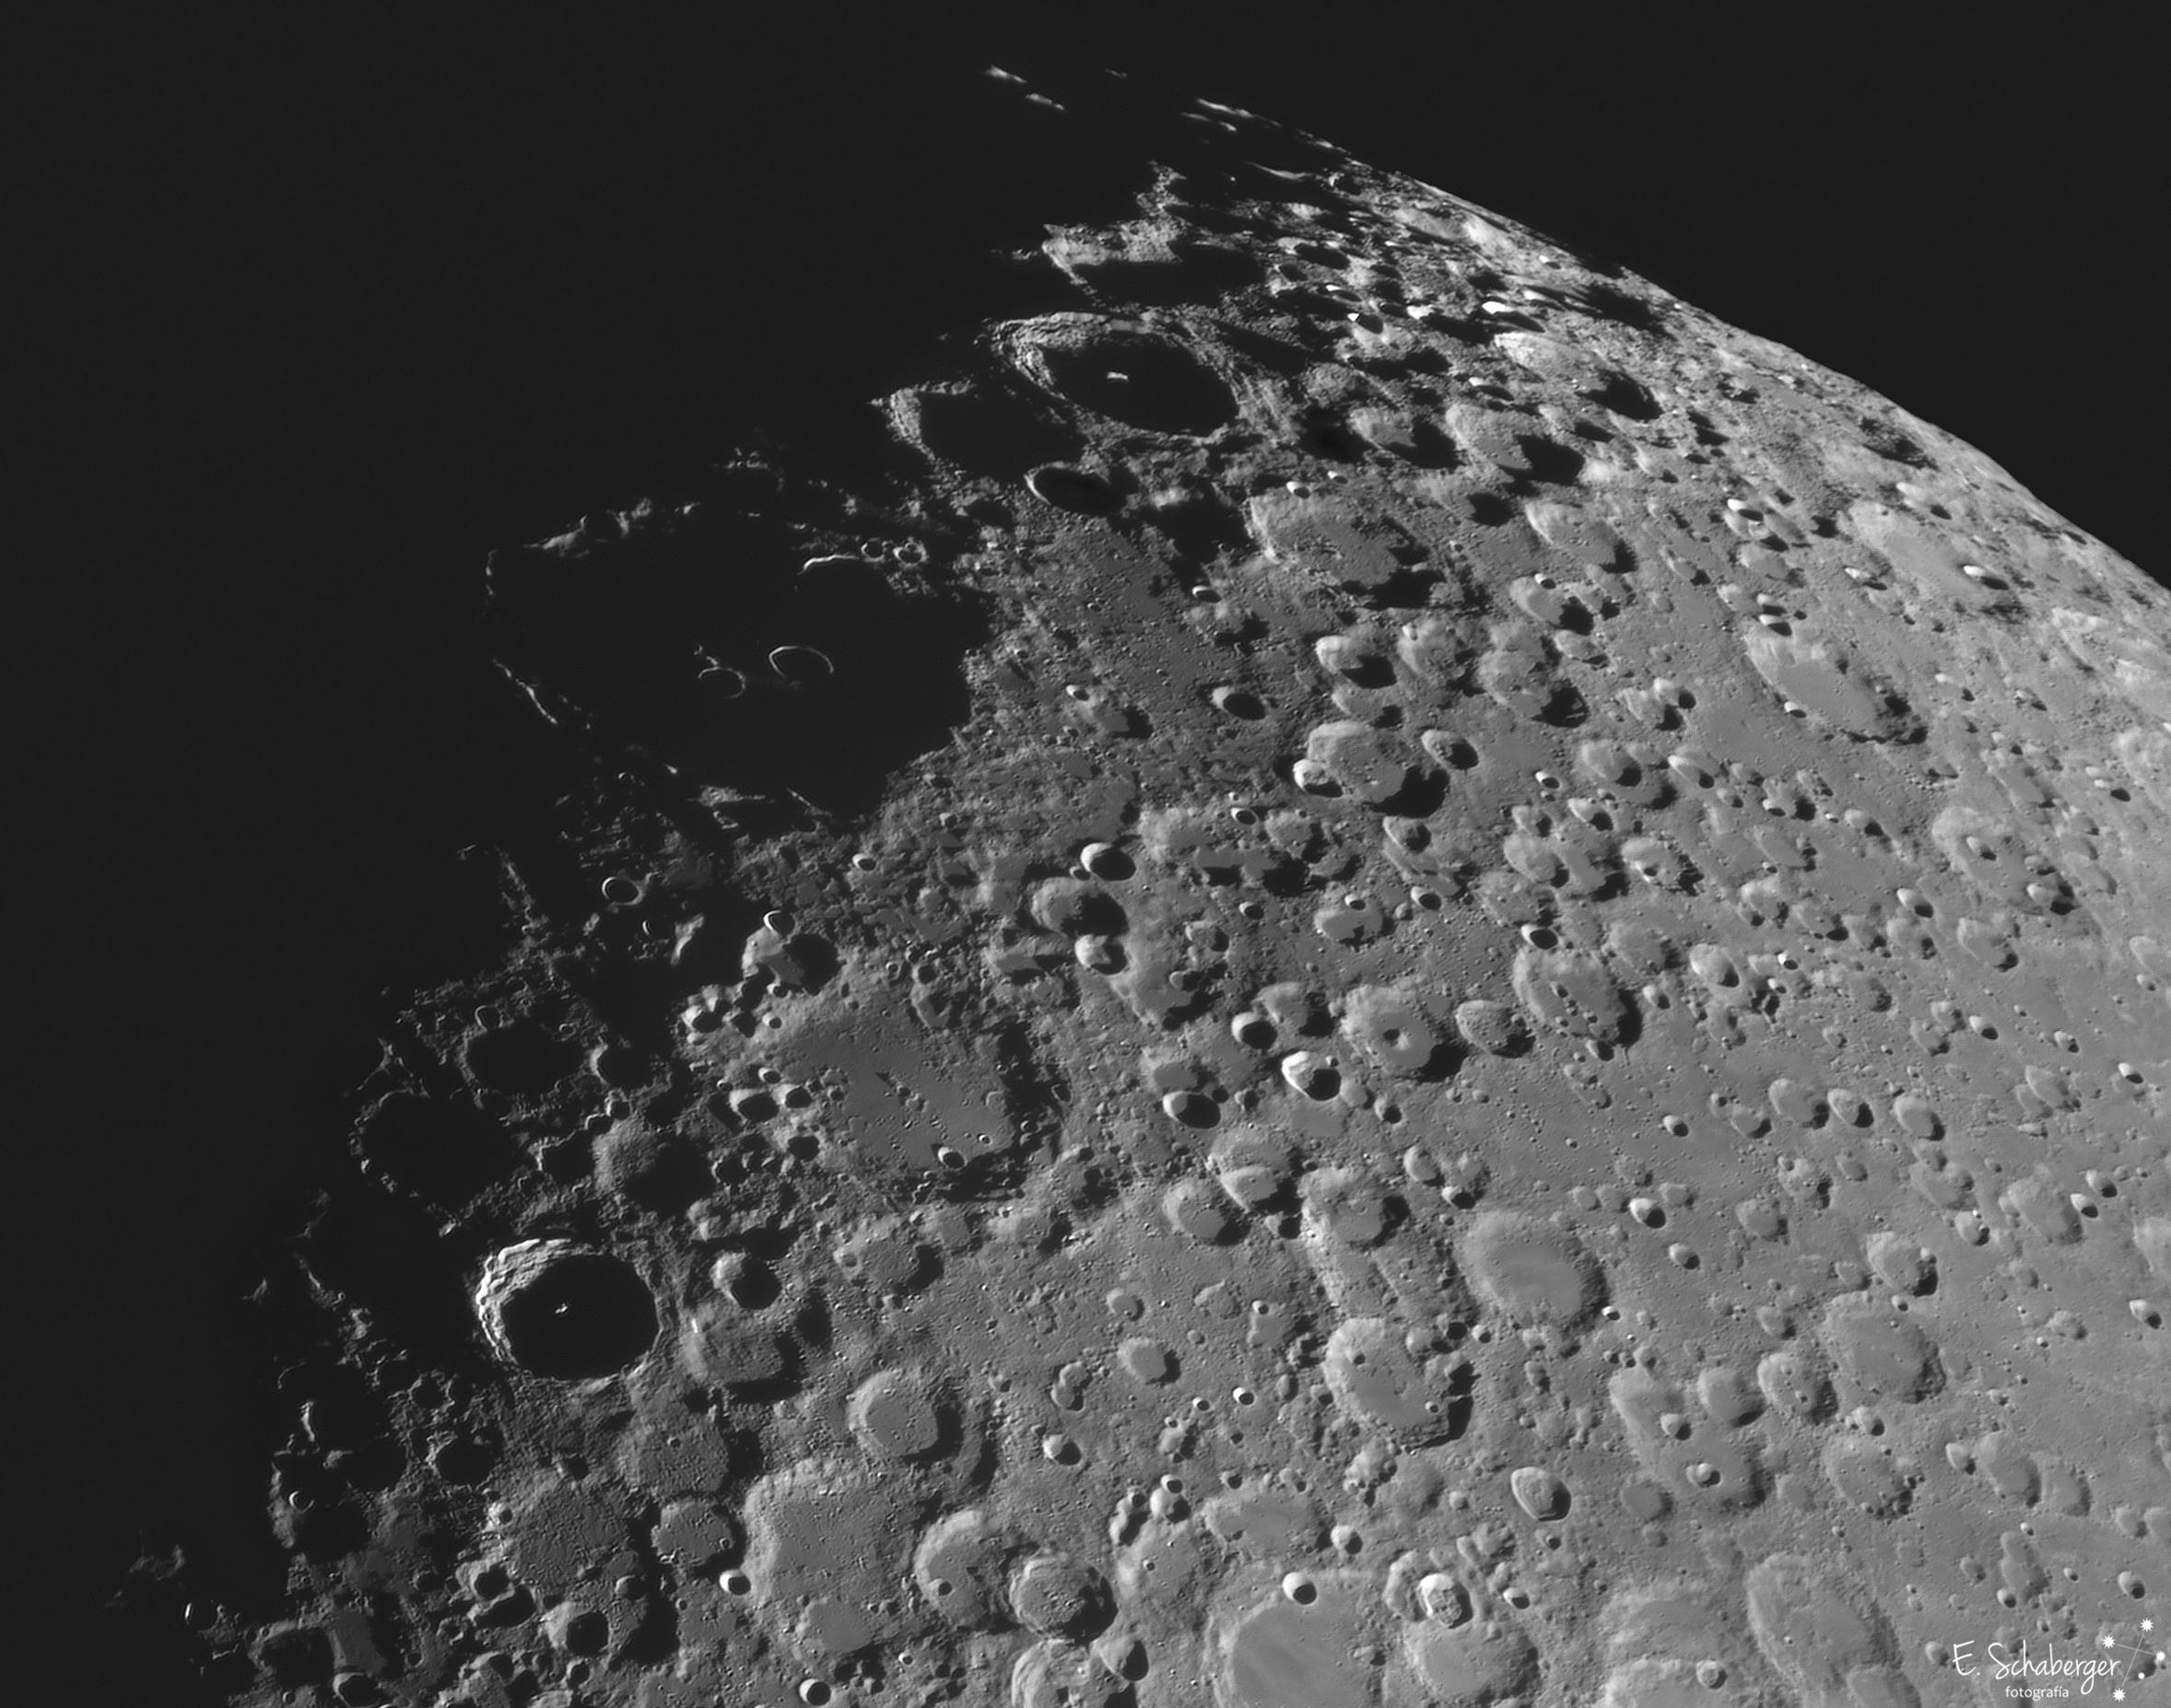 Tycho and Davius ​​craters on the lunar surface.